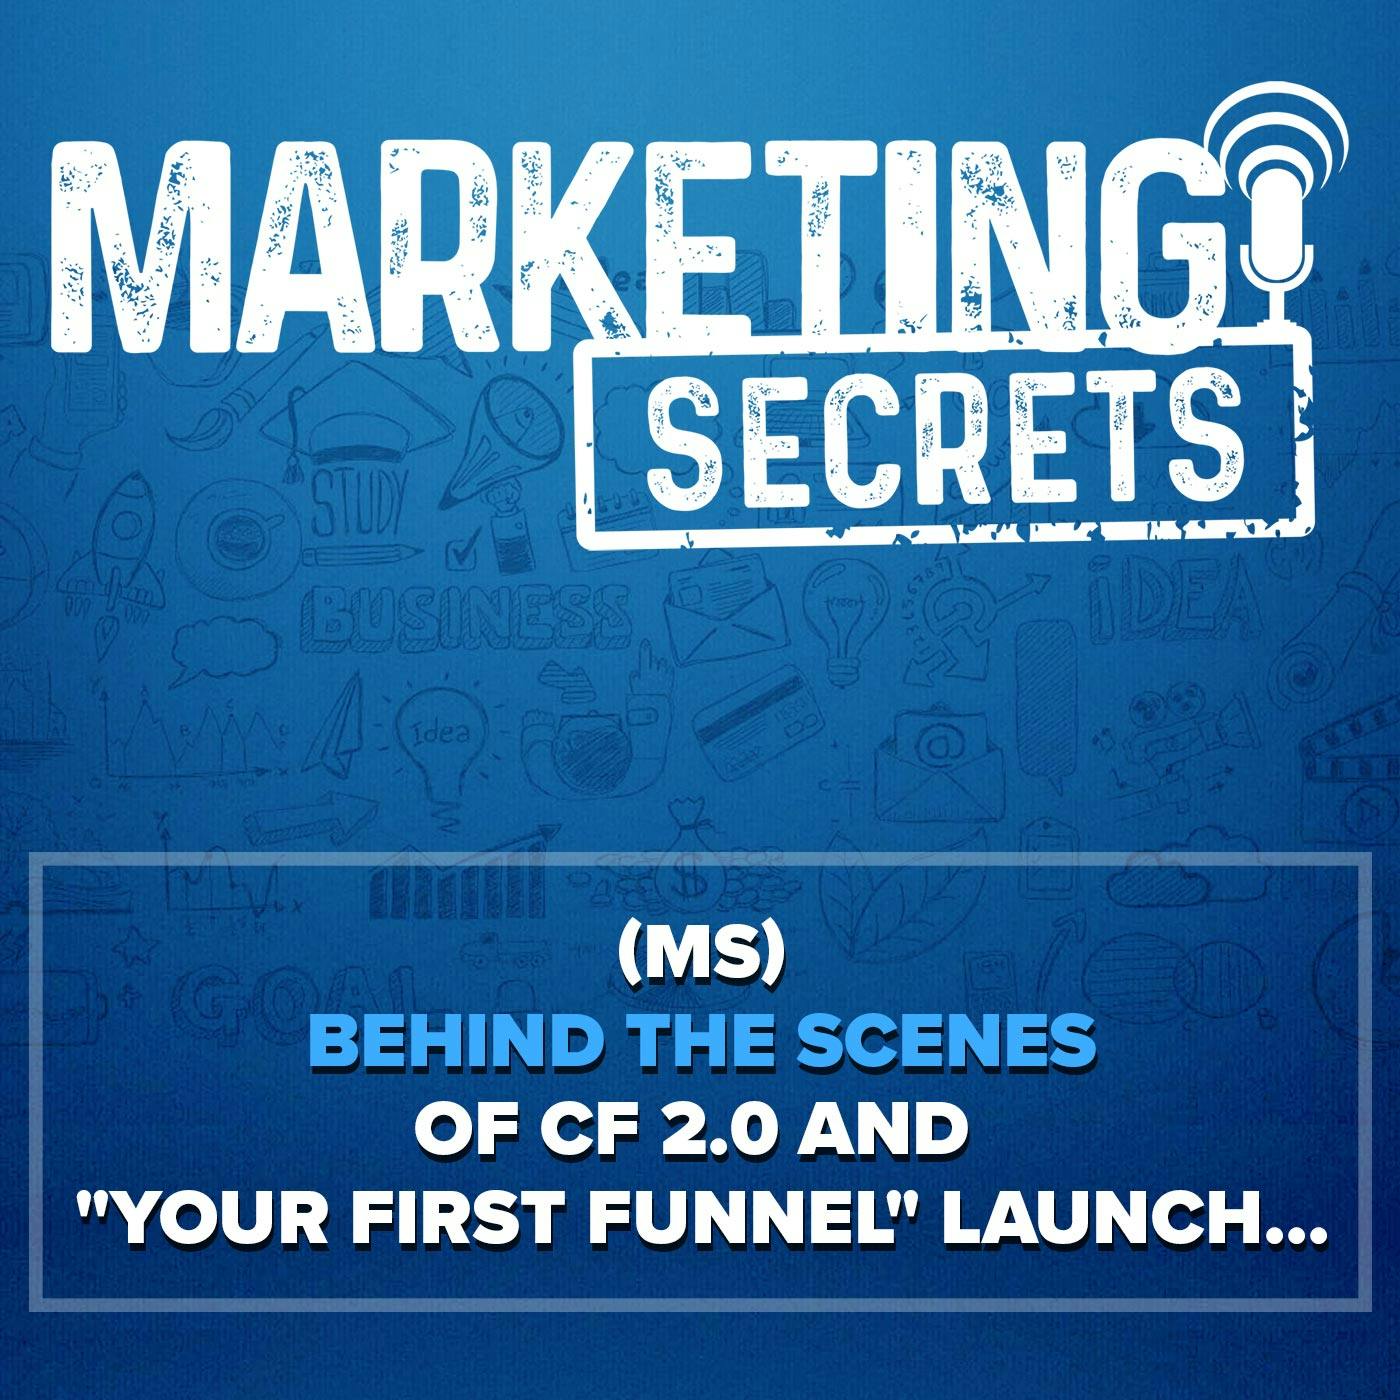 (MS) Behind the Scenes of CF 2.0 and "Your First Funnel" Launch...